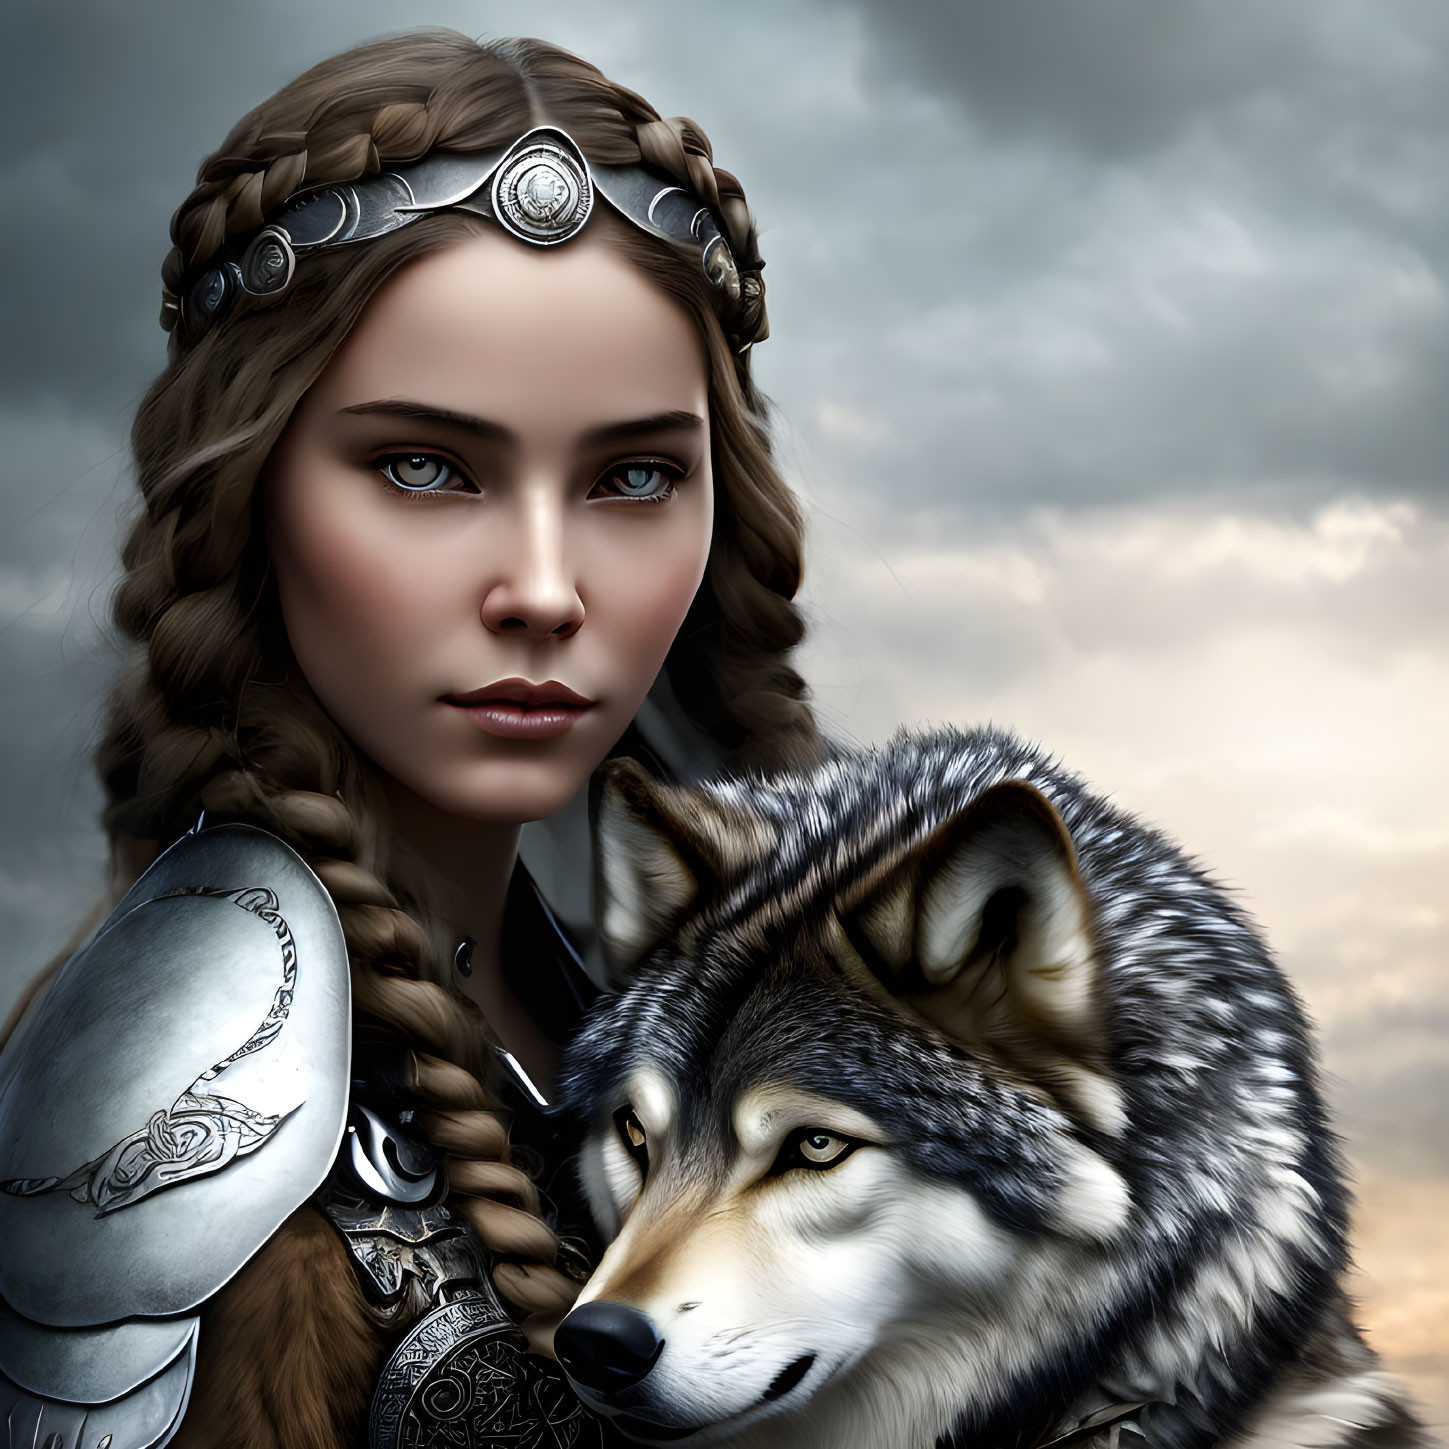 Braided hair woman in armor with wolf against cloudy sky.